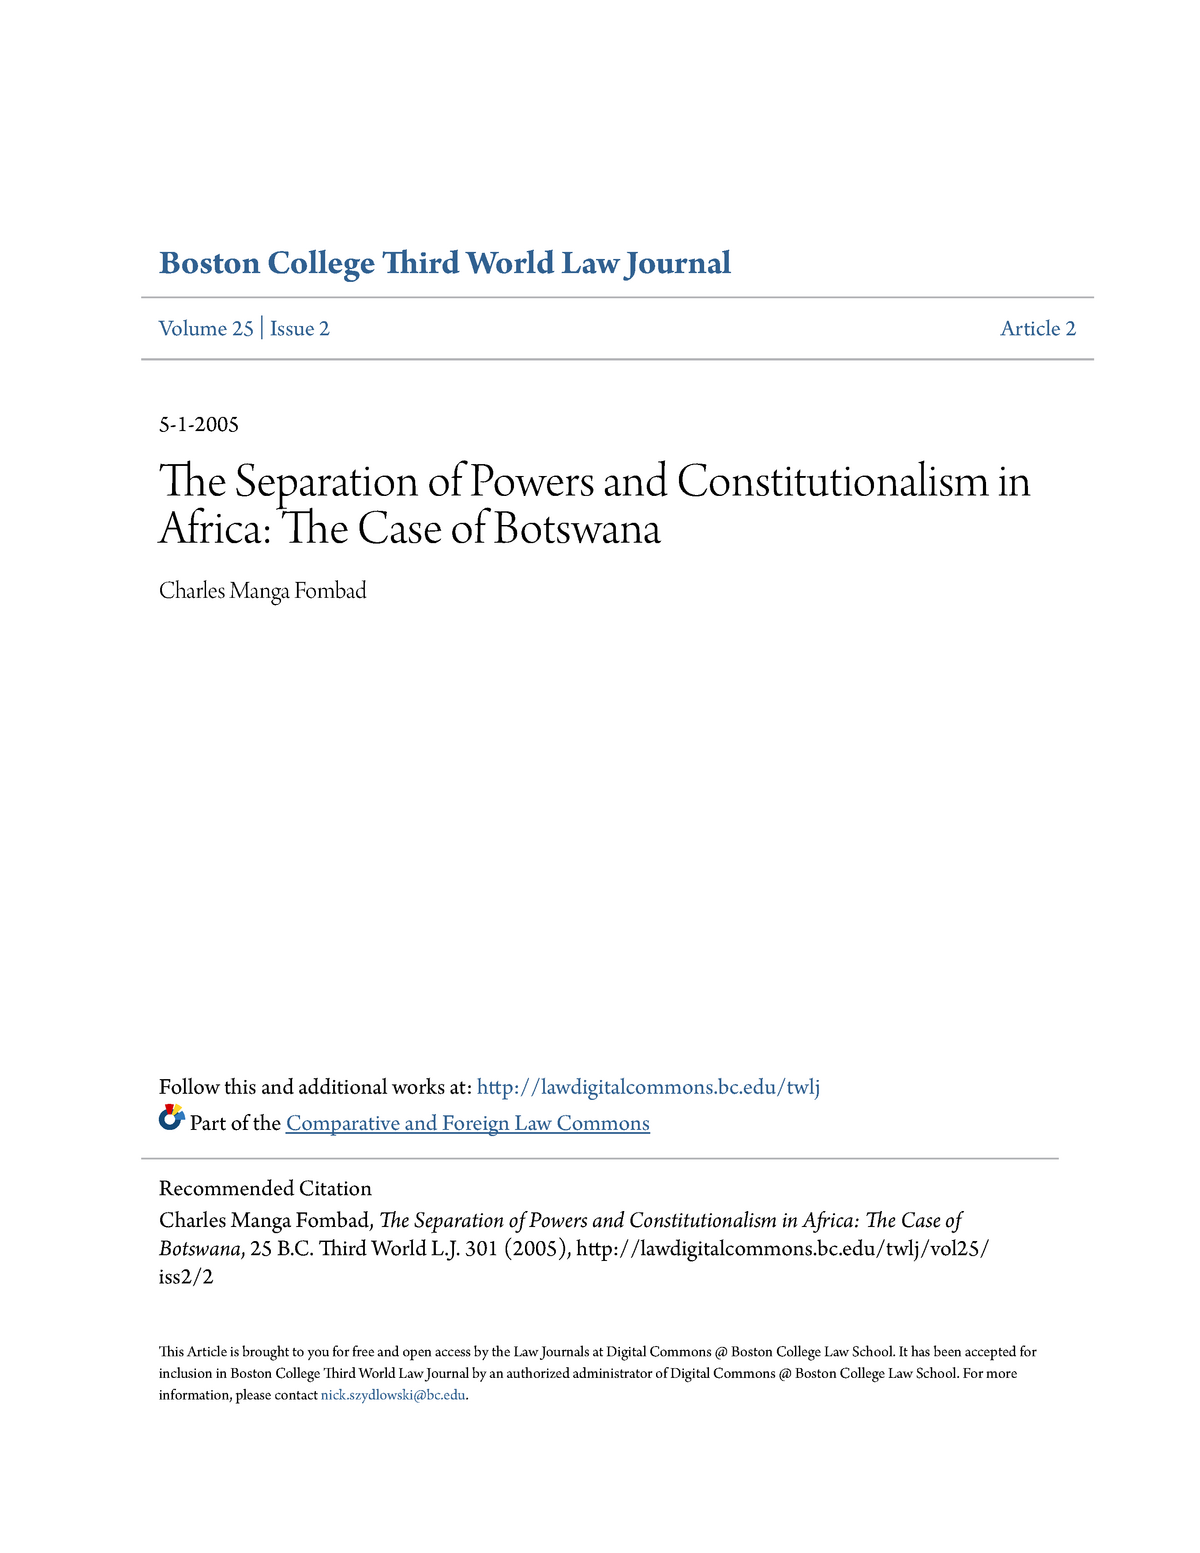 The Separation Of Powers And Constitutionalism In Africa The Cas Twlj Part Of Studocu